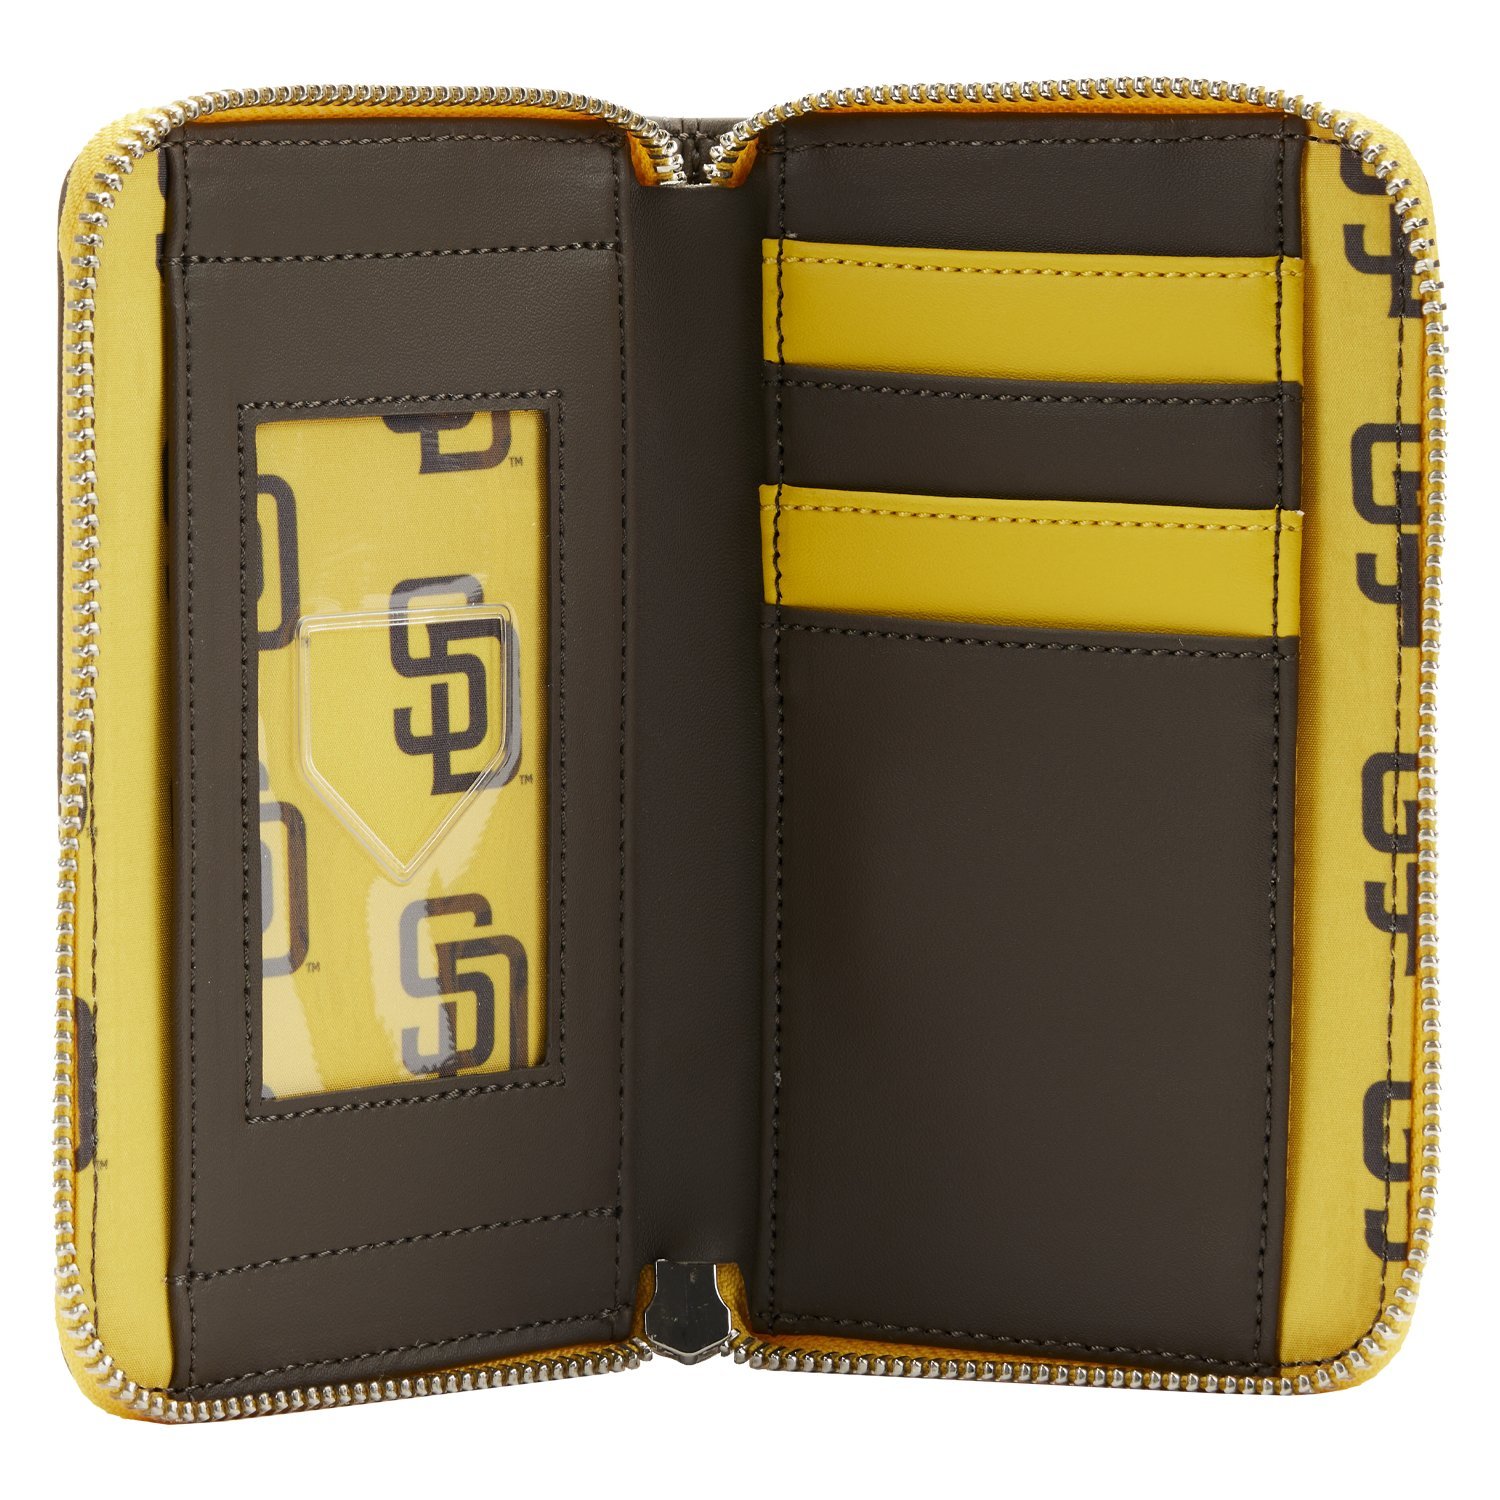 San Diego Padres Patches